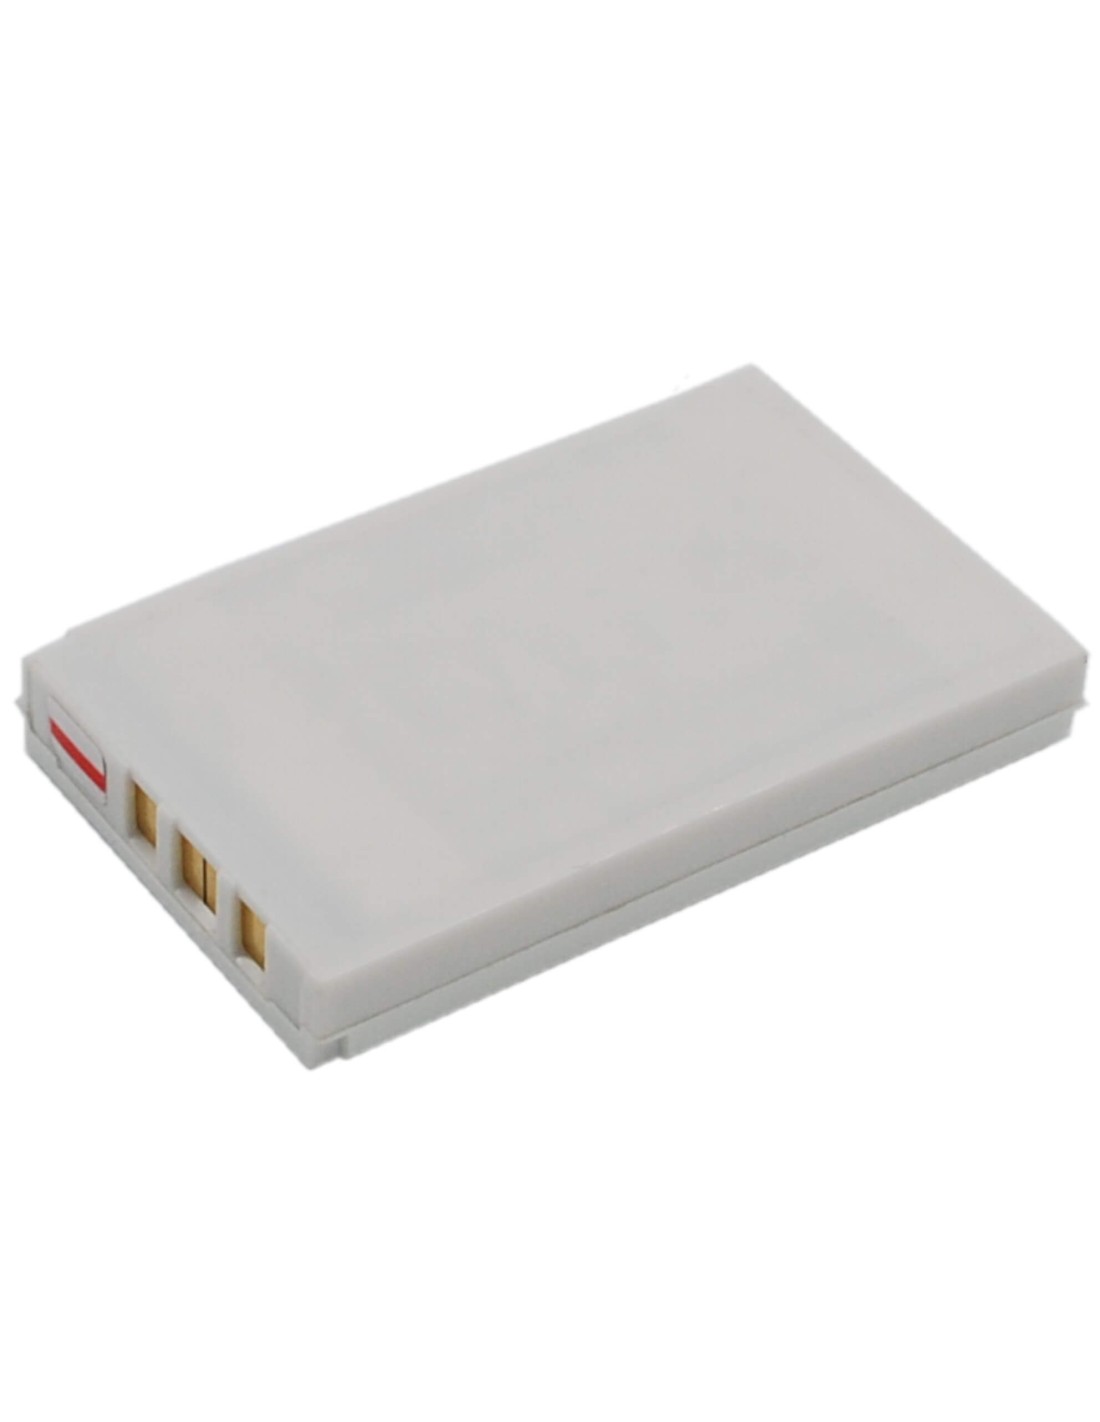 Battery for Fortuna Clip-on Bluetooth Gps 3.7V, 750mAh - 2.78Wh